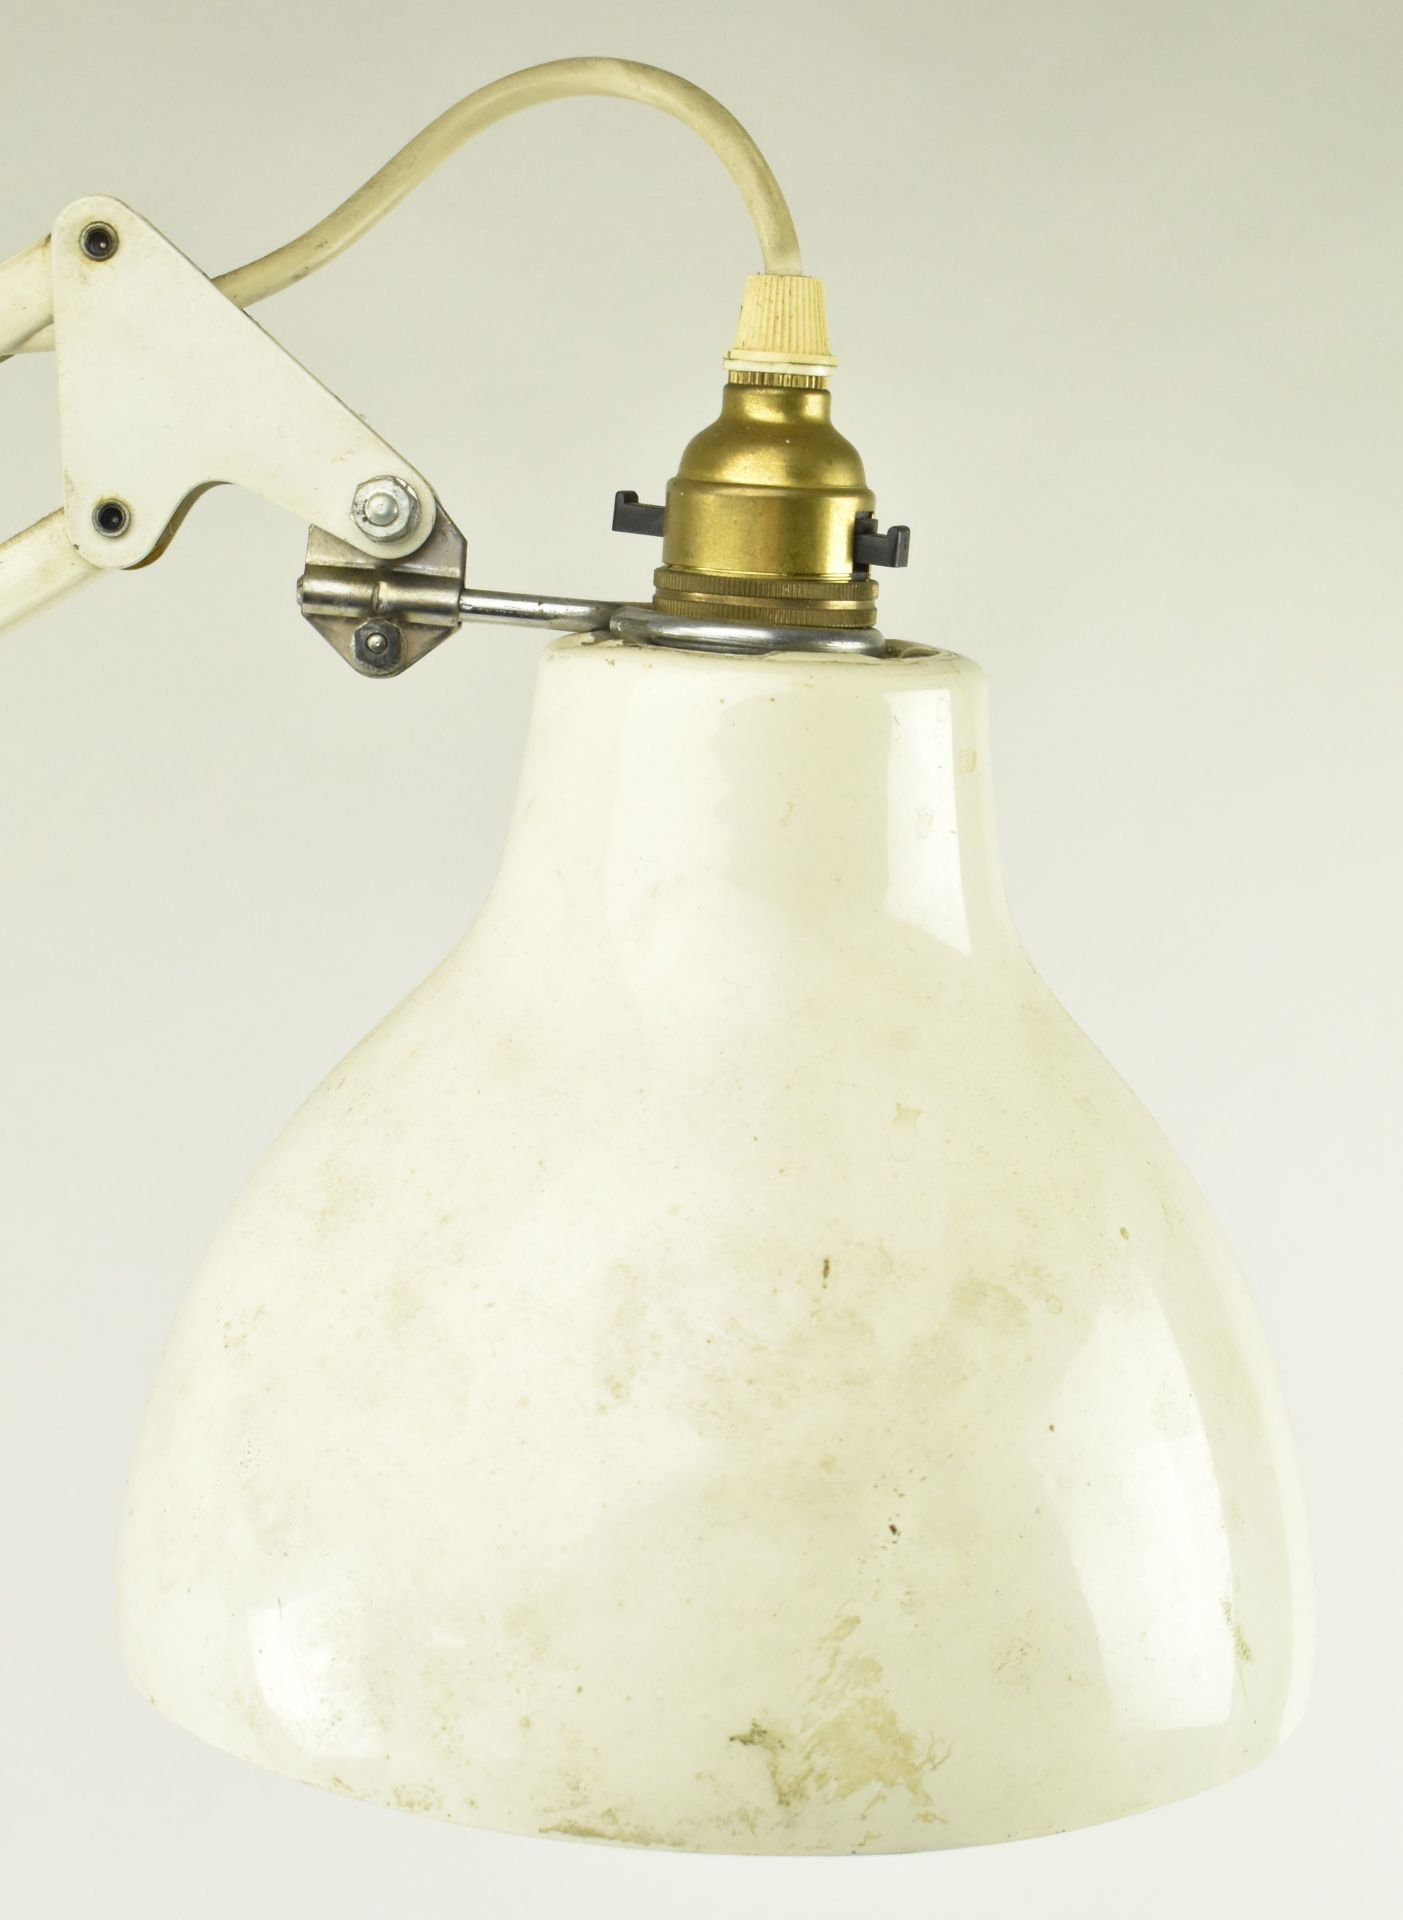 HERBERT TERRY & SONS - ANGLEPOISE 1208 PROTOTYPE DESK LAMP - Image 4 of 7